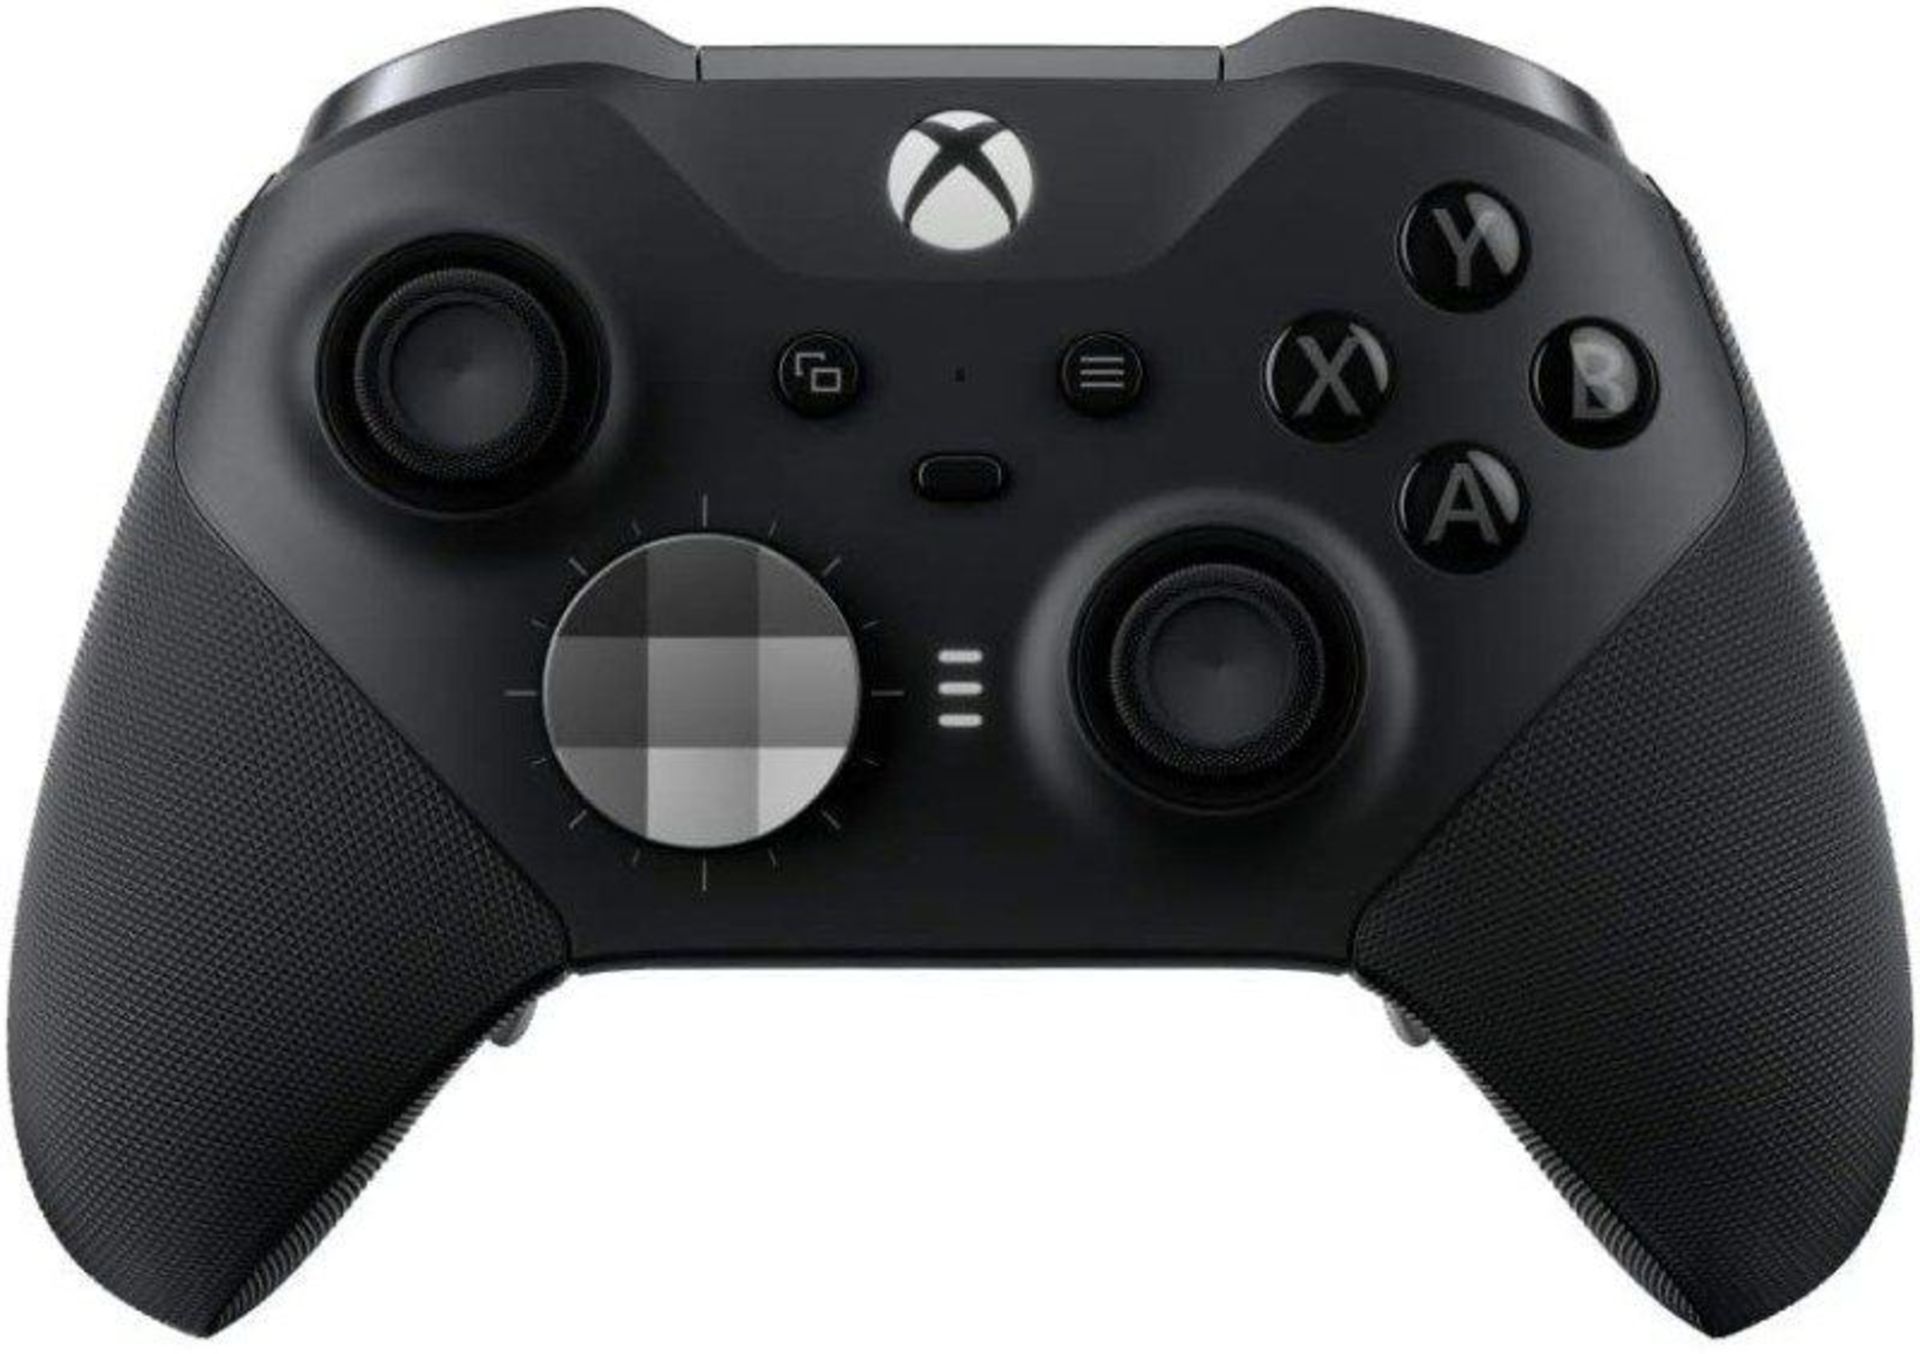 Microsoft Official Xbox Elite Wireless Controller Series 2 - Black. - P2. RRP £199.00. Experience